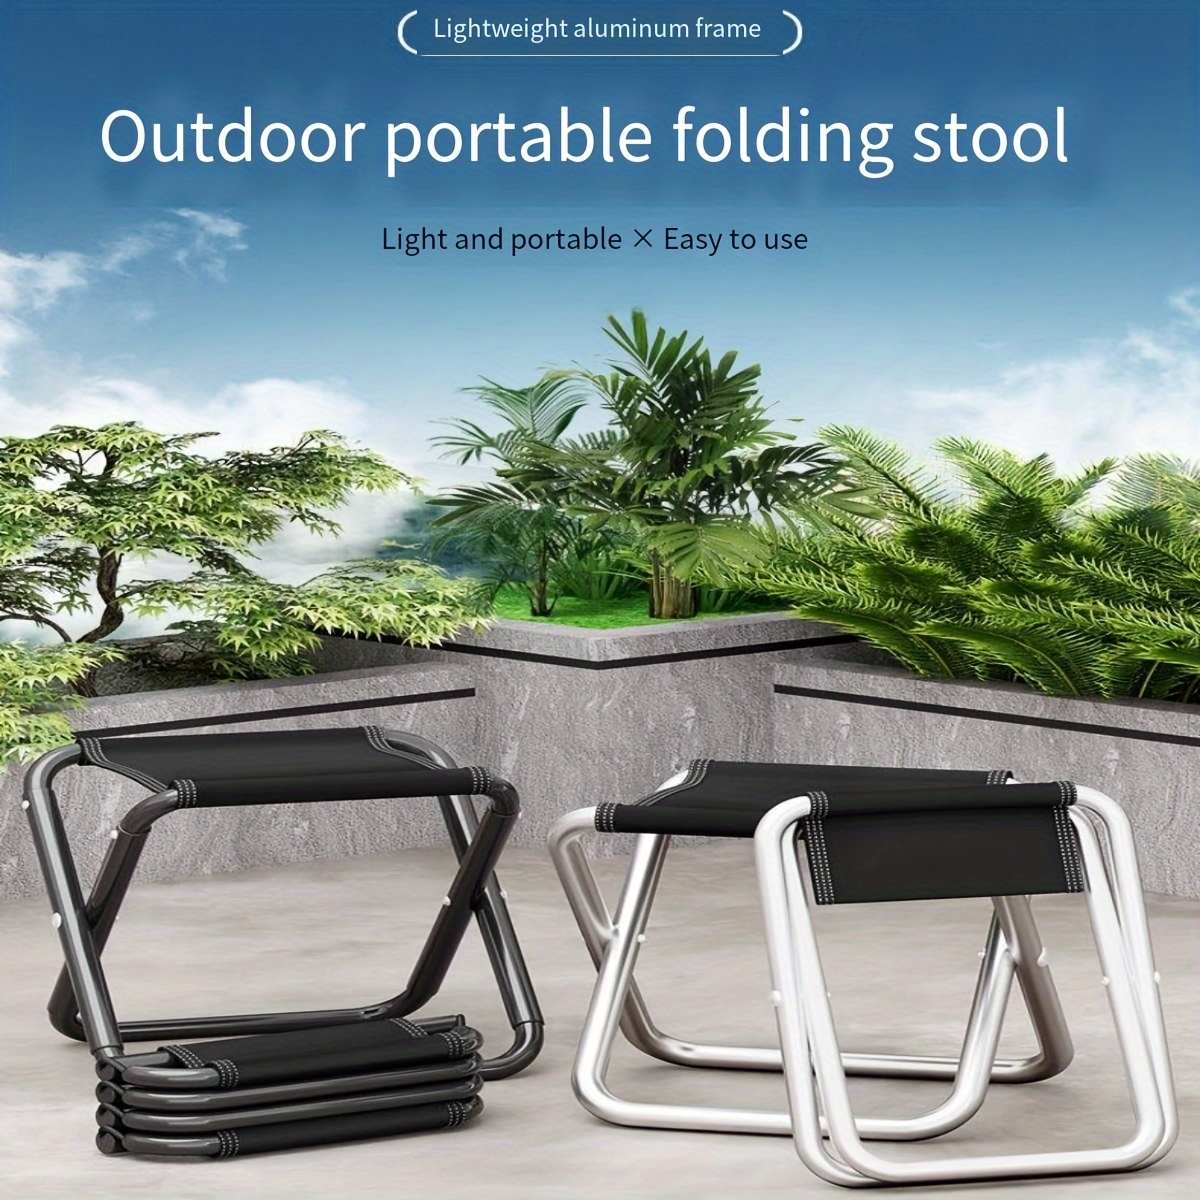 Portable Telescopic Stool For Camping, Travel, Picnic, Beach, Fishing  Retractable Folding Chair With Seat Tarraco 230905 From Pong06, $18.77